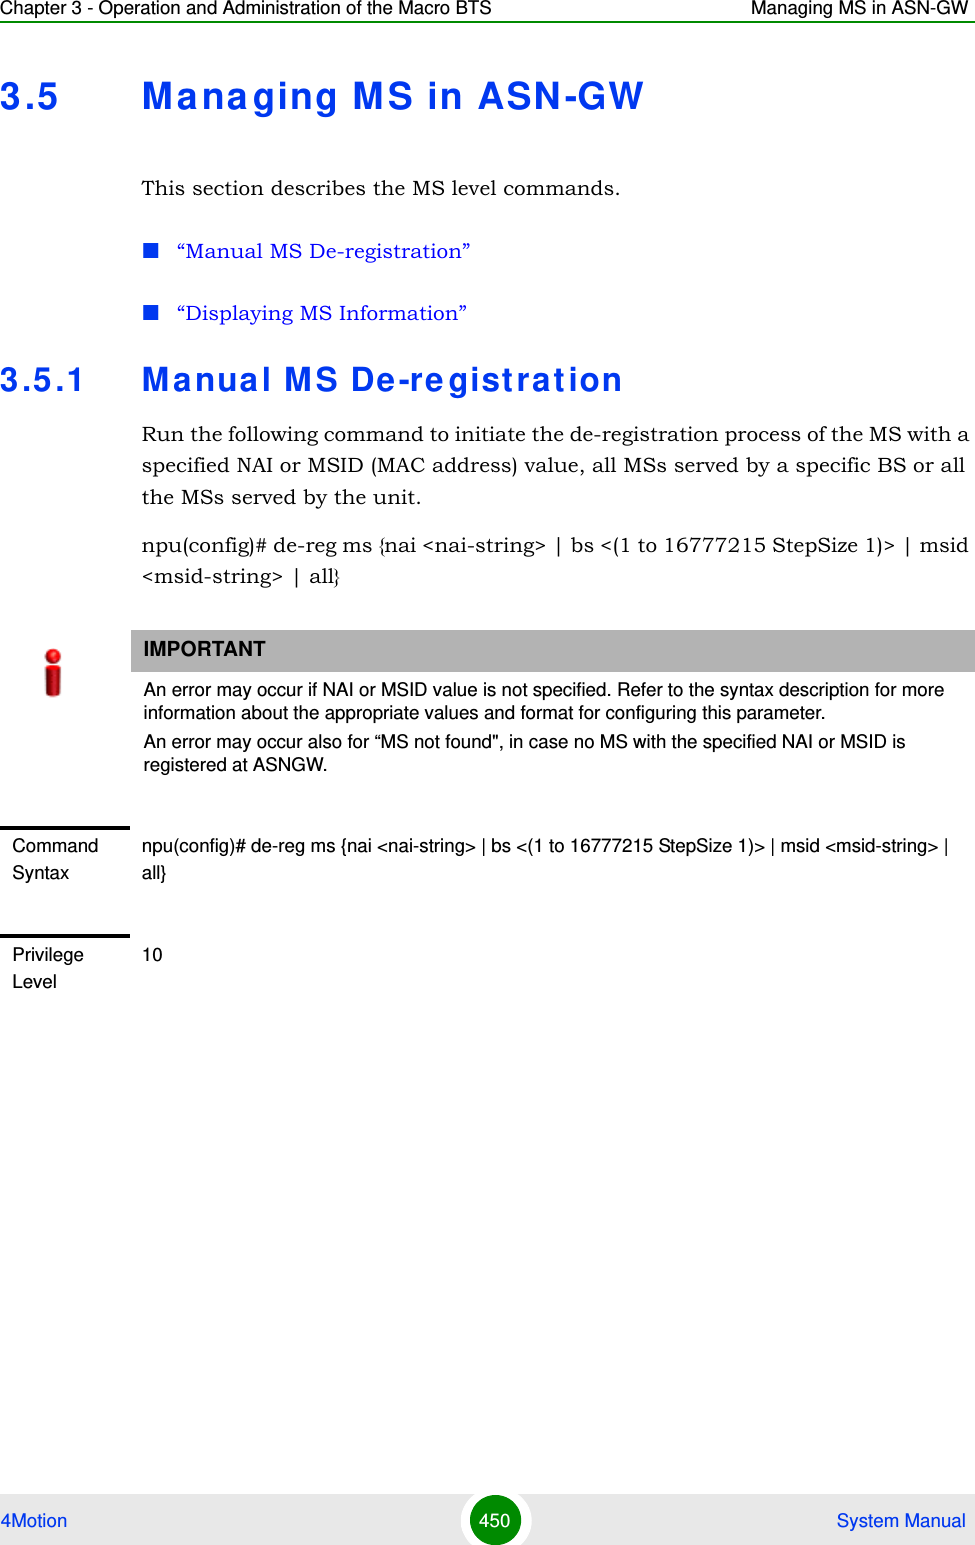 Chapter 3 - Operation and Administration of the Macro BTS Managing MS in ASN-GW4Motion 450  System Manual3.5 Ma na ging MS in ASN-GWThis section describes the MS level commands.“Manual MS De-registration”“Displaying MS Information”3.5 .1 Manual MS De -re gist rationRun the following command to initiate the de-registration process of the MS with a specified NAI or MSID (MAC address) value, all MSs served by a specific BS or all the MSs served by the unit.npu(config)# de-reg ms {nai &lt;nai-string&gt; | bs &lt;(1 to 16777215 StepSize 1)&gt; | msid &lt;msid-string&gt; | all}IMPORTANTAn error may occur if NAI or MSID value is not specified. Refer to the syntax description for more information about the appropriate values and format for configuring this parameter.An error may occur also for “MS not found&quot;, in case no MS with the specified NAI or MSID is registered at ASNGW.Command Syntaxnpu(config)# de-reg ms {nai &lt;nai-string&gt; | bs &lt;(1 to 16777215 StepSize 1)&gt; | msid &lt;msid-string&gt; | all}Privilege Level10